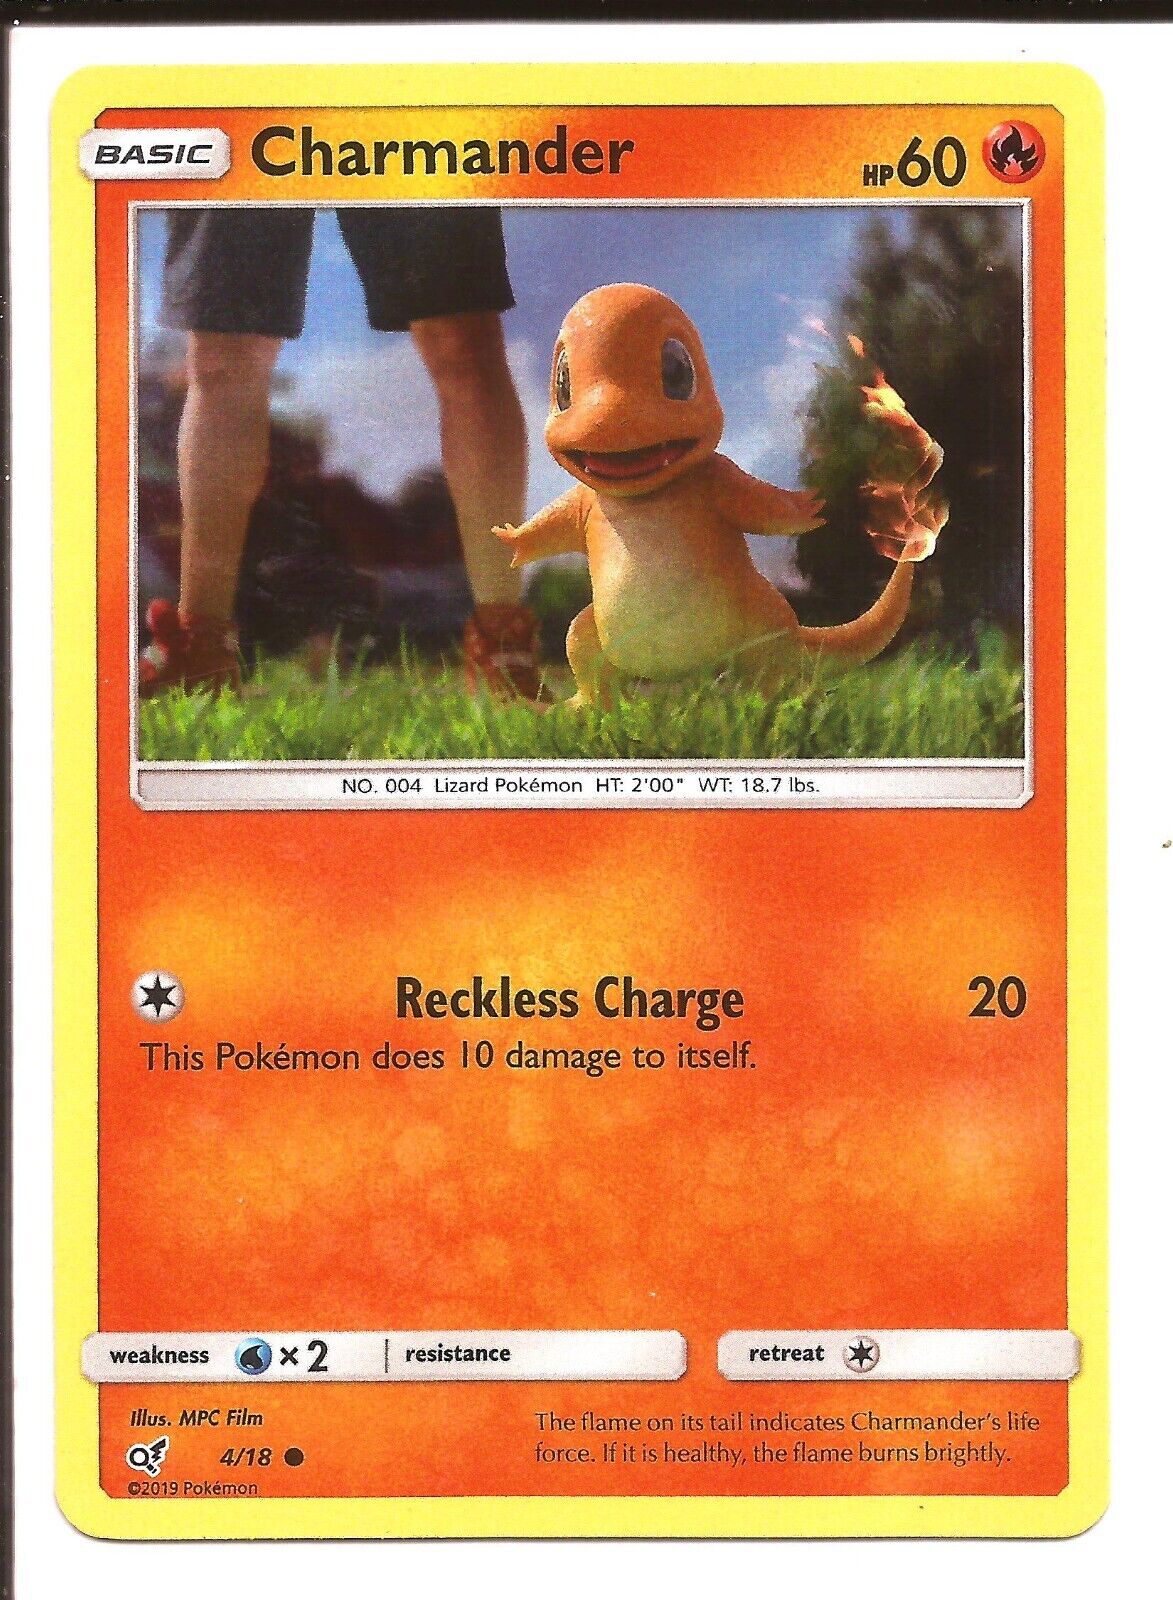 2019 Pokémon Charmander Holofoil Card 4/18 - Lightly Played Excellent Condition